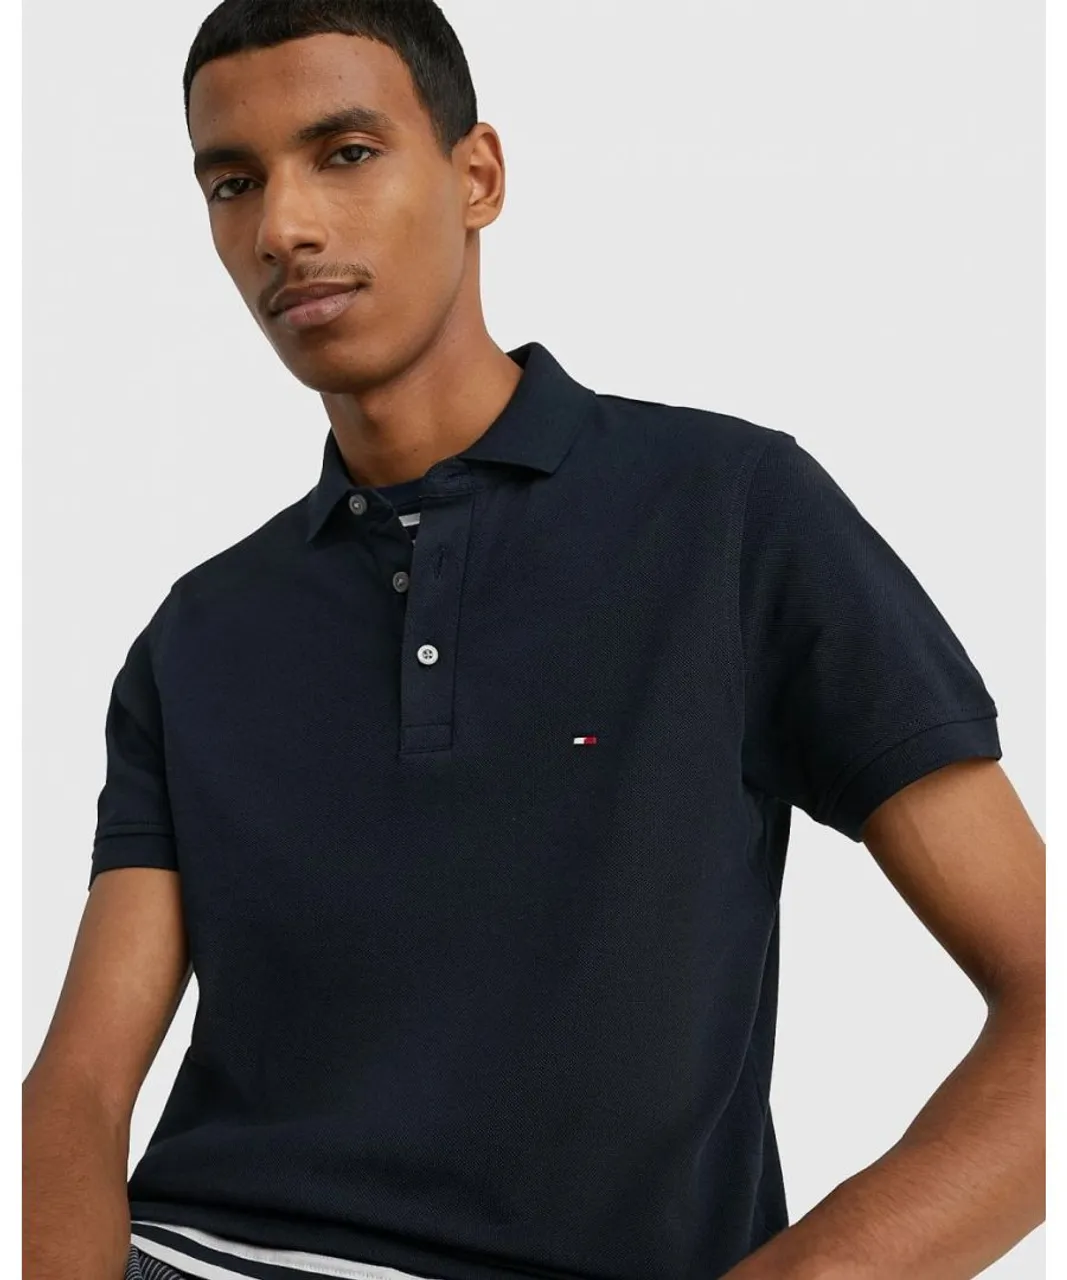 Tommy Hilfiger 1985 Slim Fit Mens Polo Shirts - Button - Compare prices